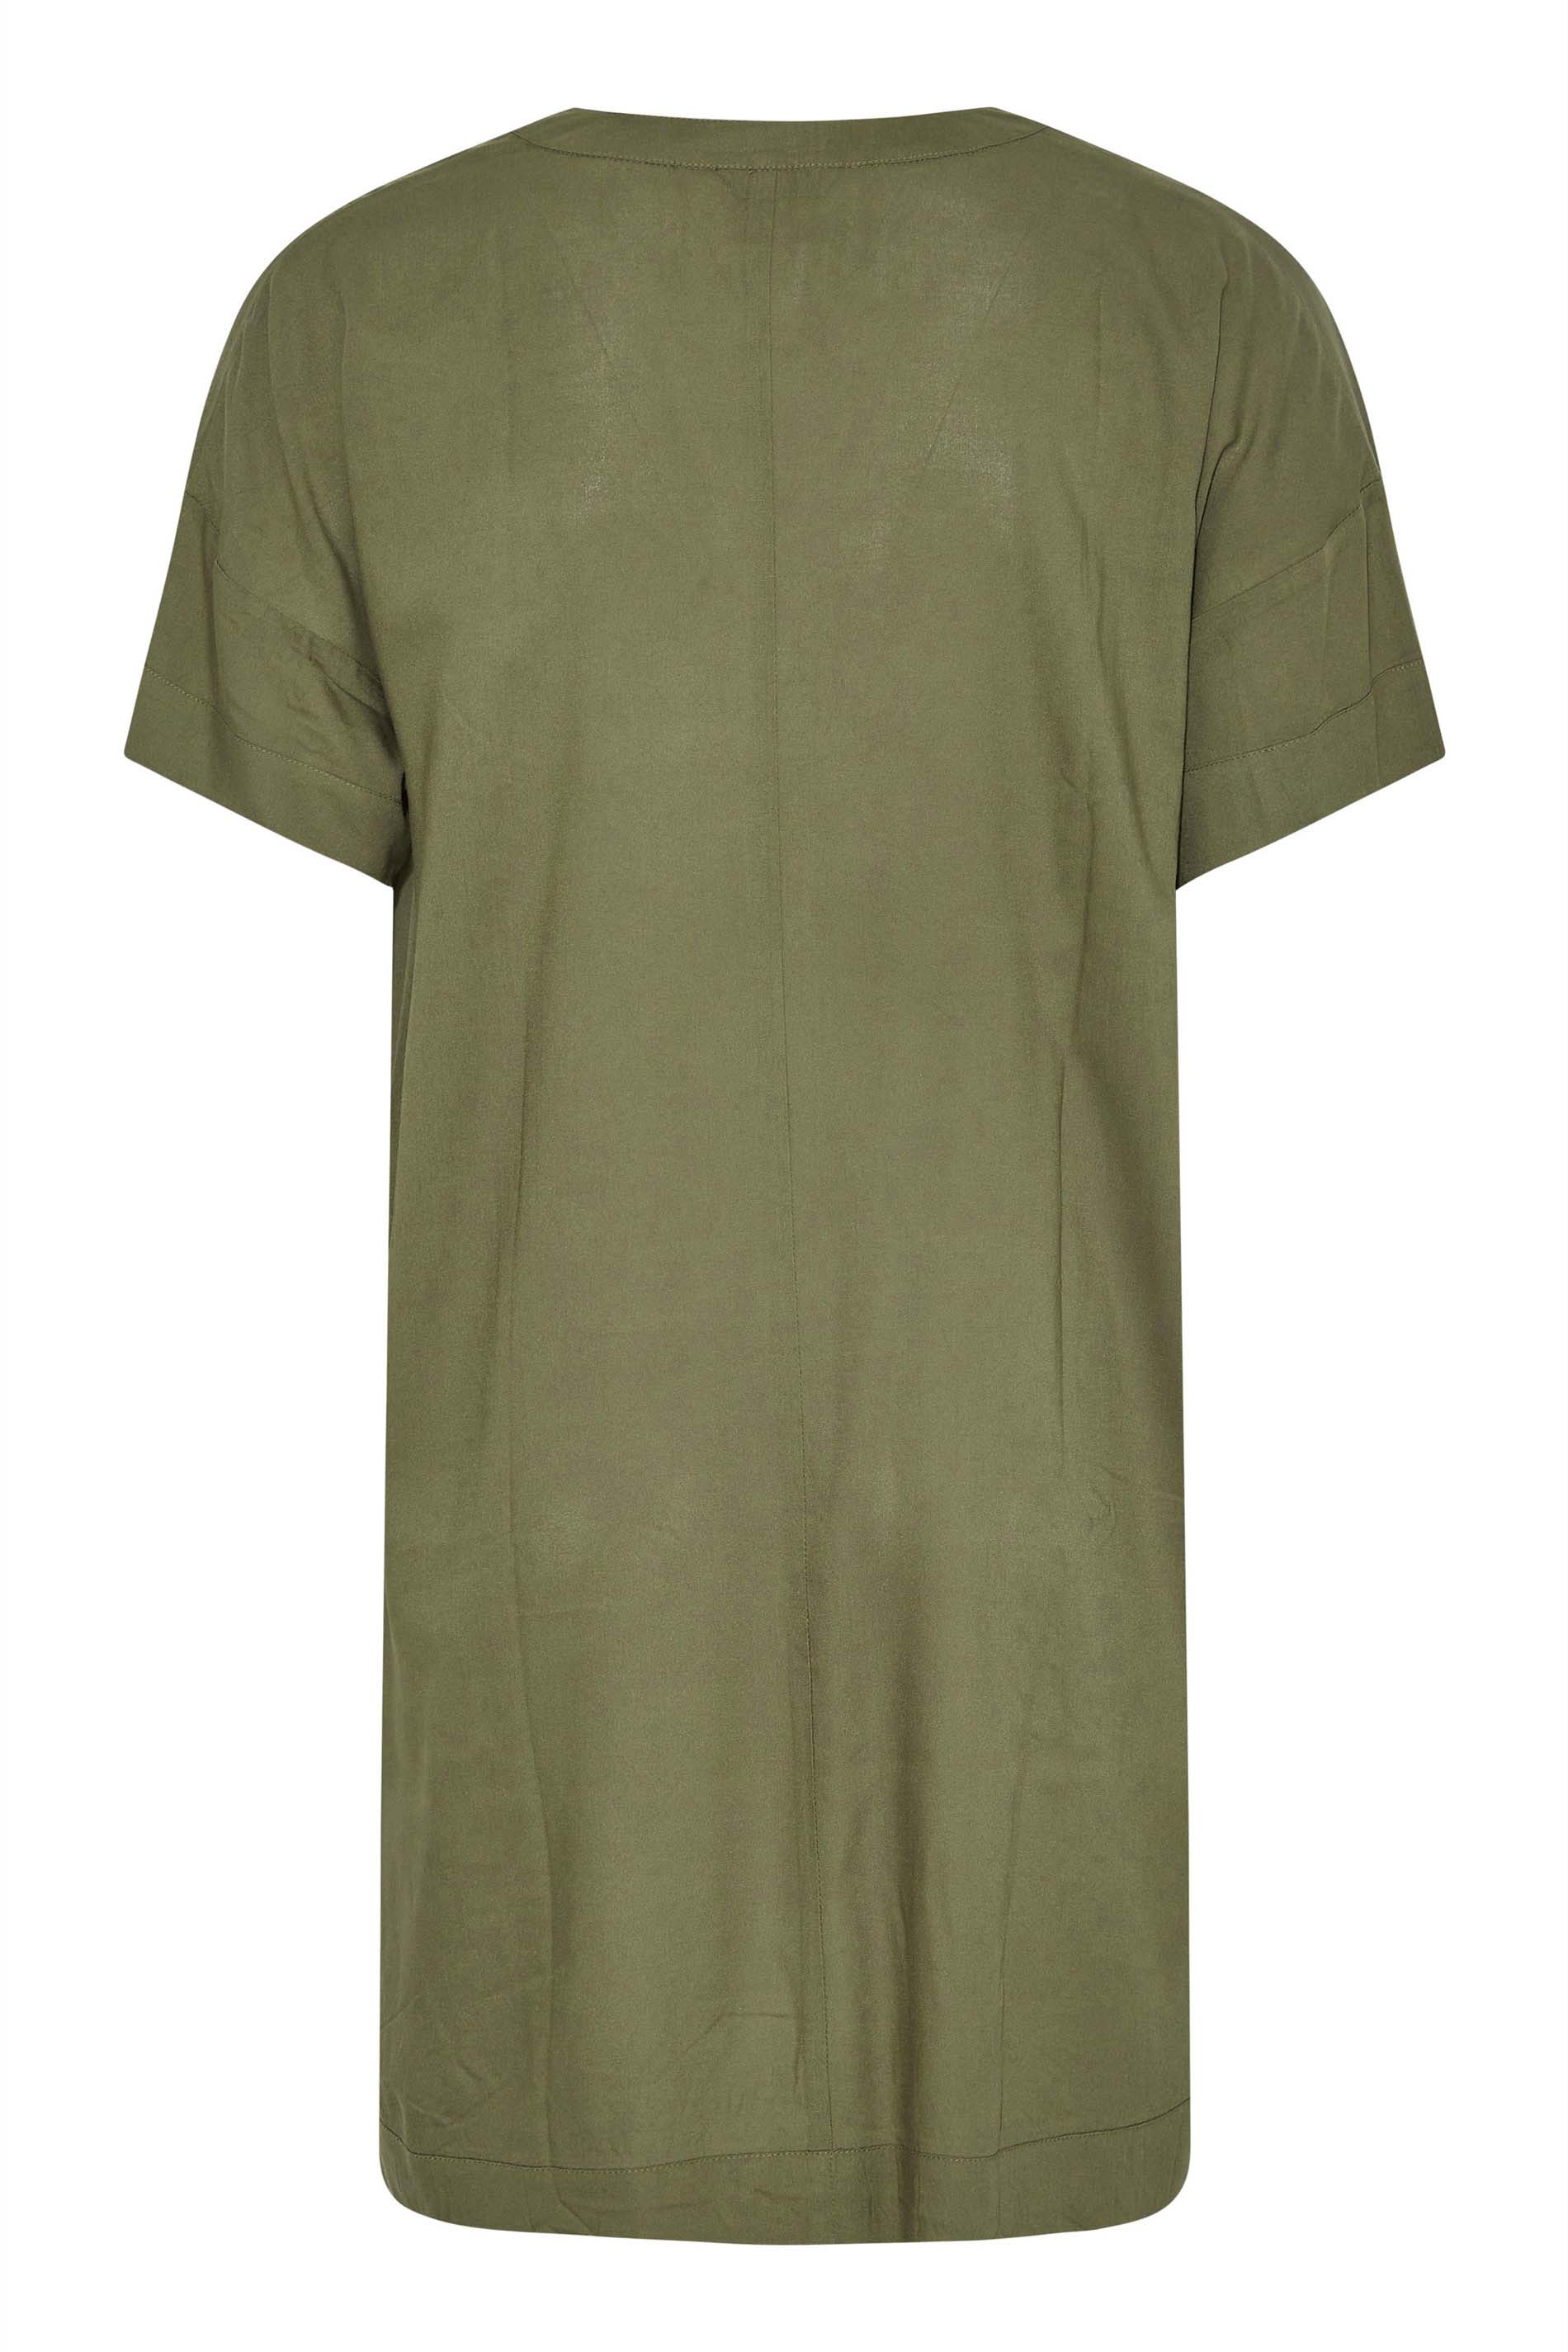 Robes Grande Taille Grande taille  Robes Casual | LIMITED COLLECTION - Robe Verte Kaki Style Chemisier - GU87724